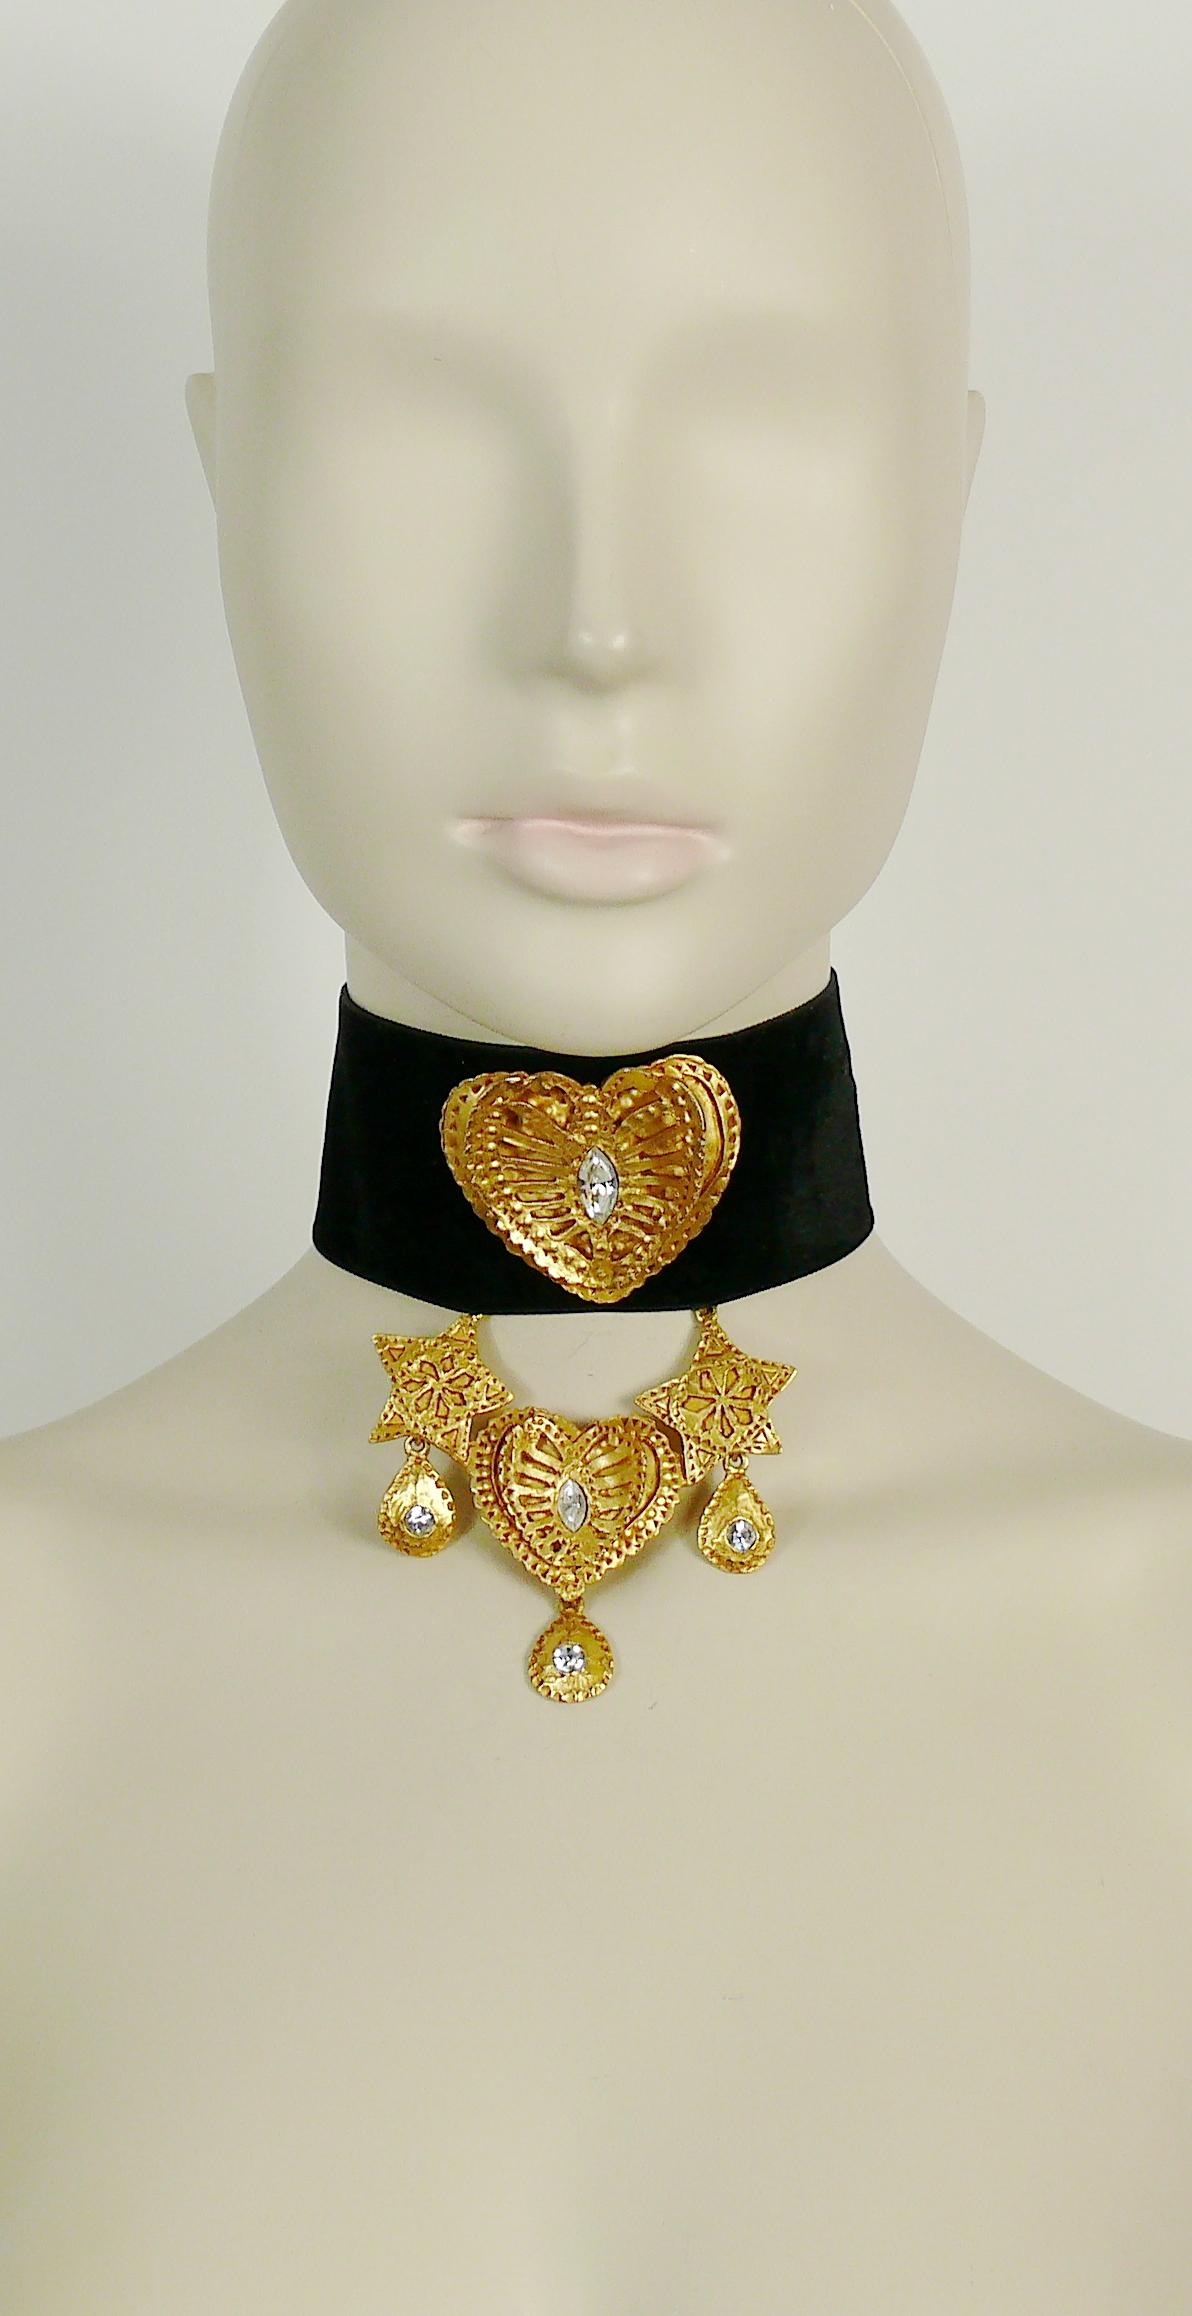 CHRISTIAN LACROIX documented vintage rare black velvet choker necklace featuring textured gold toned stars, hearts and charms with clear crystal embellishement.

Similar model worn by super model CHRISTY TURLINGTON at the CHRISTIAN LACROIX